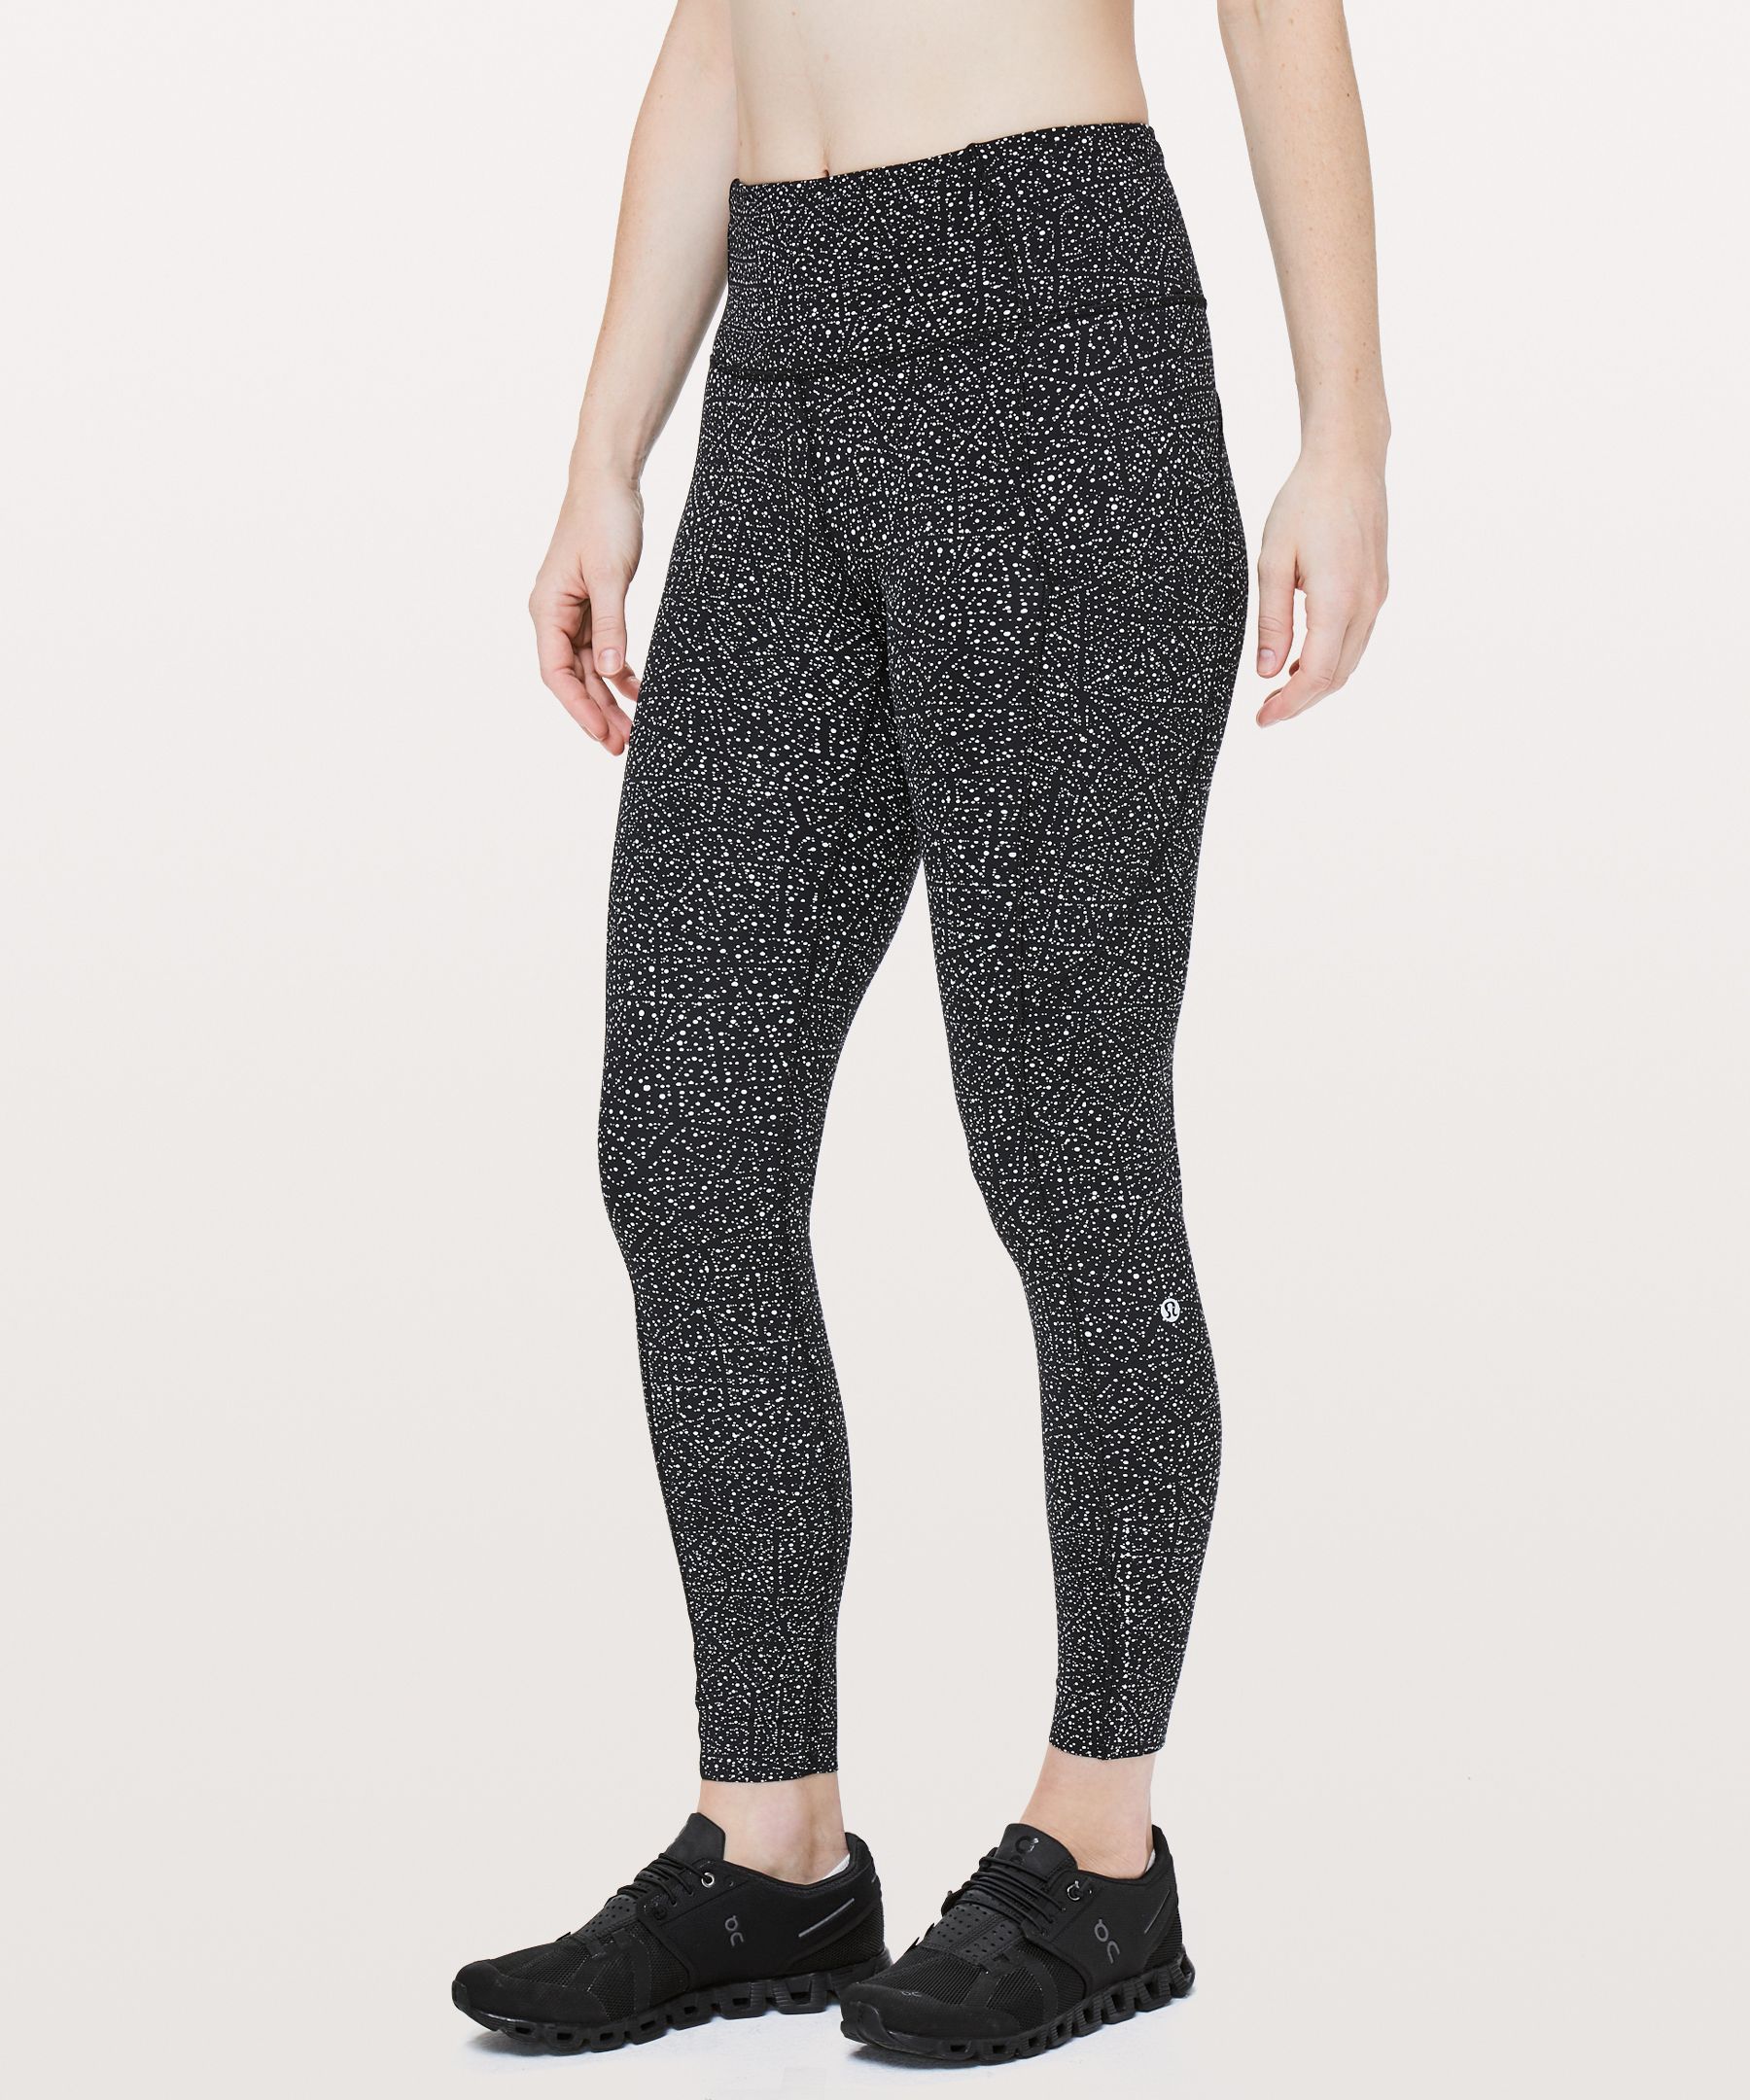 Fast and Free 7/8 Tight | lululemon SG